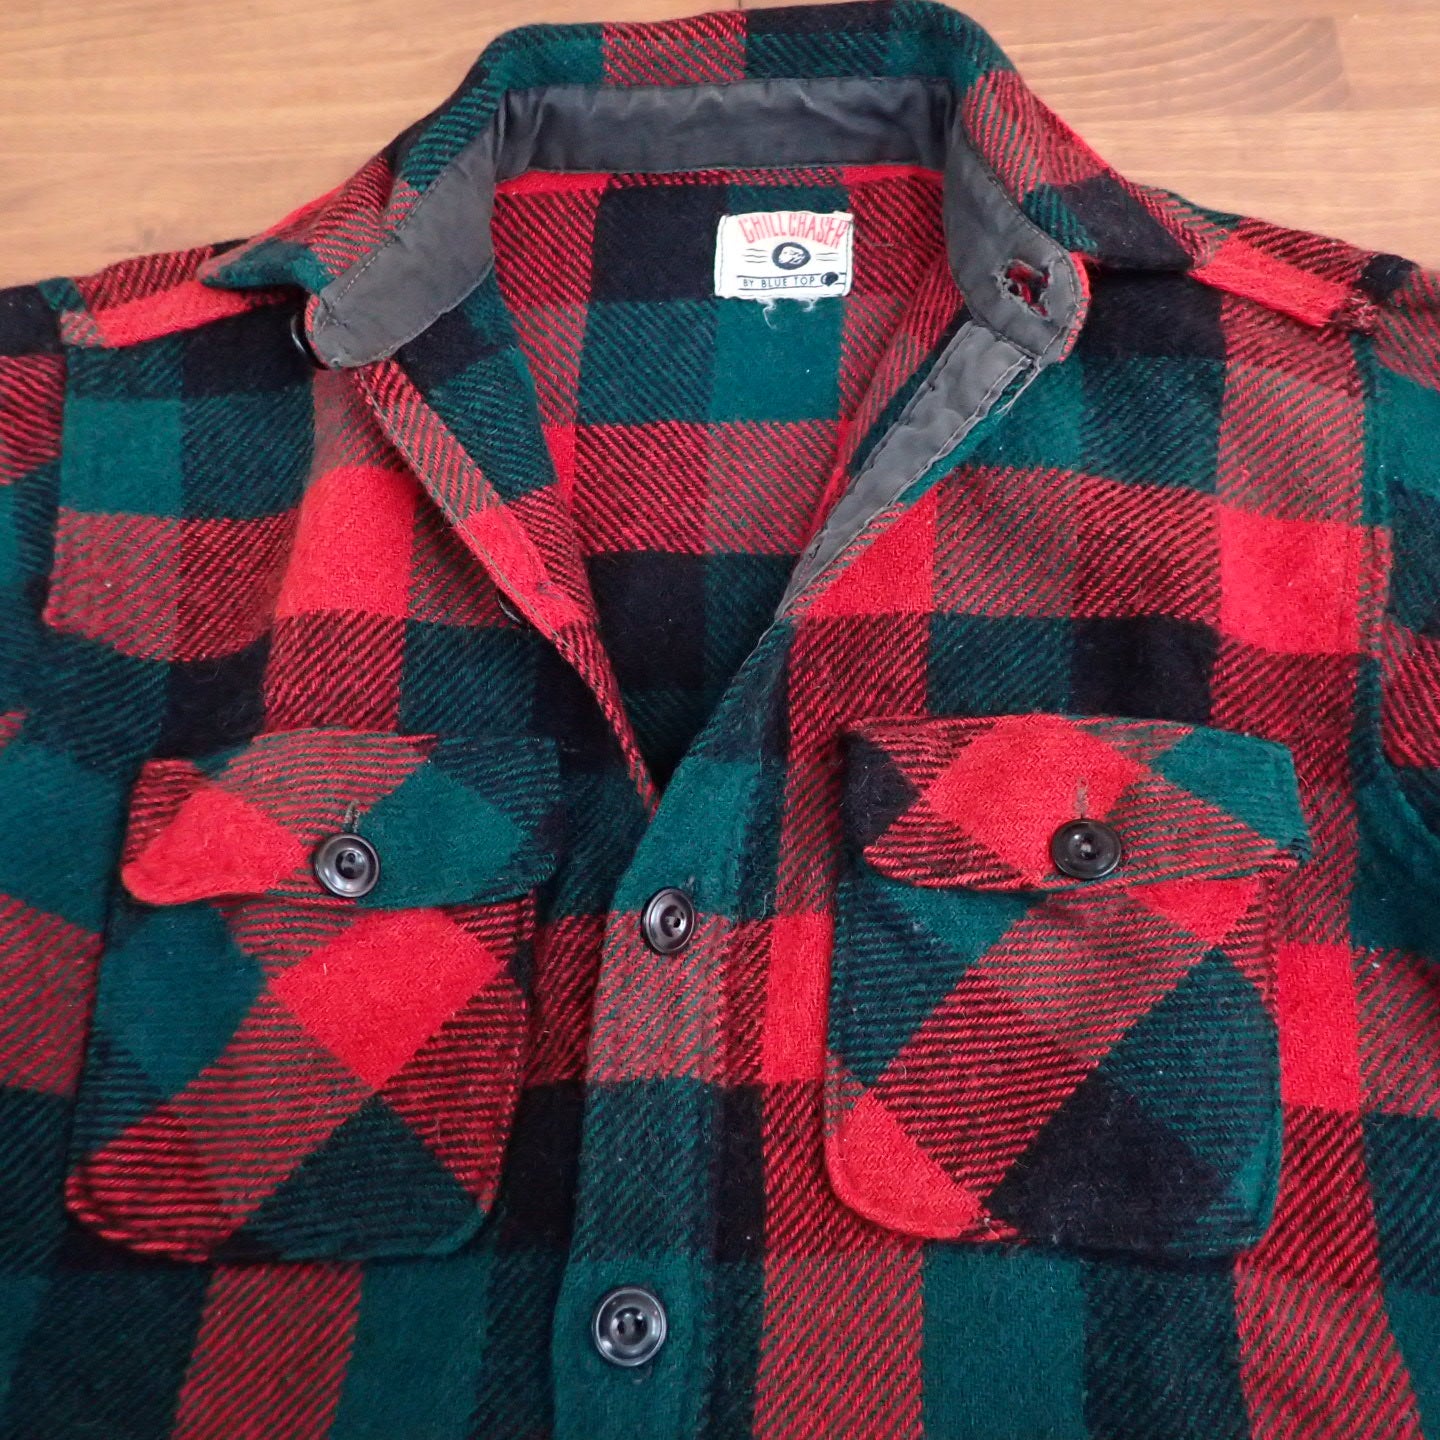 60s Chill Chaser Wool Flannel Block Check Shirt